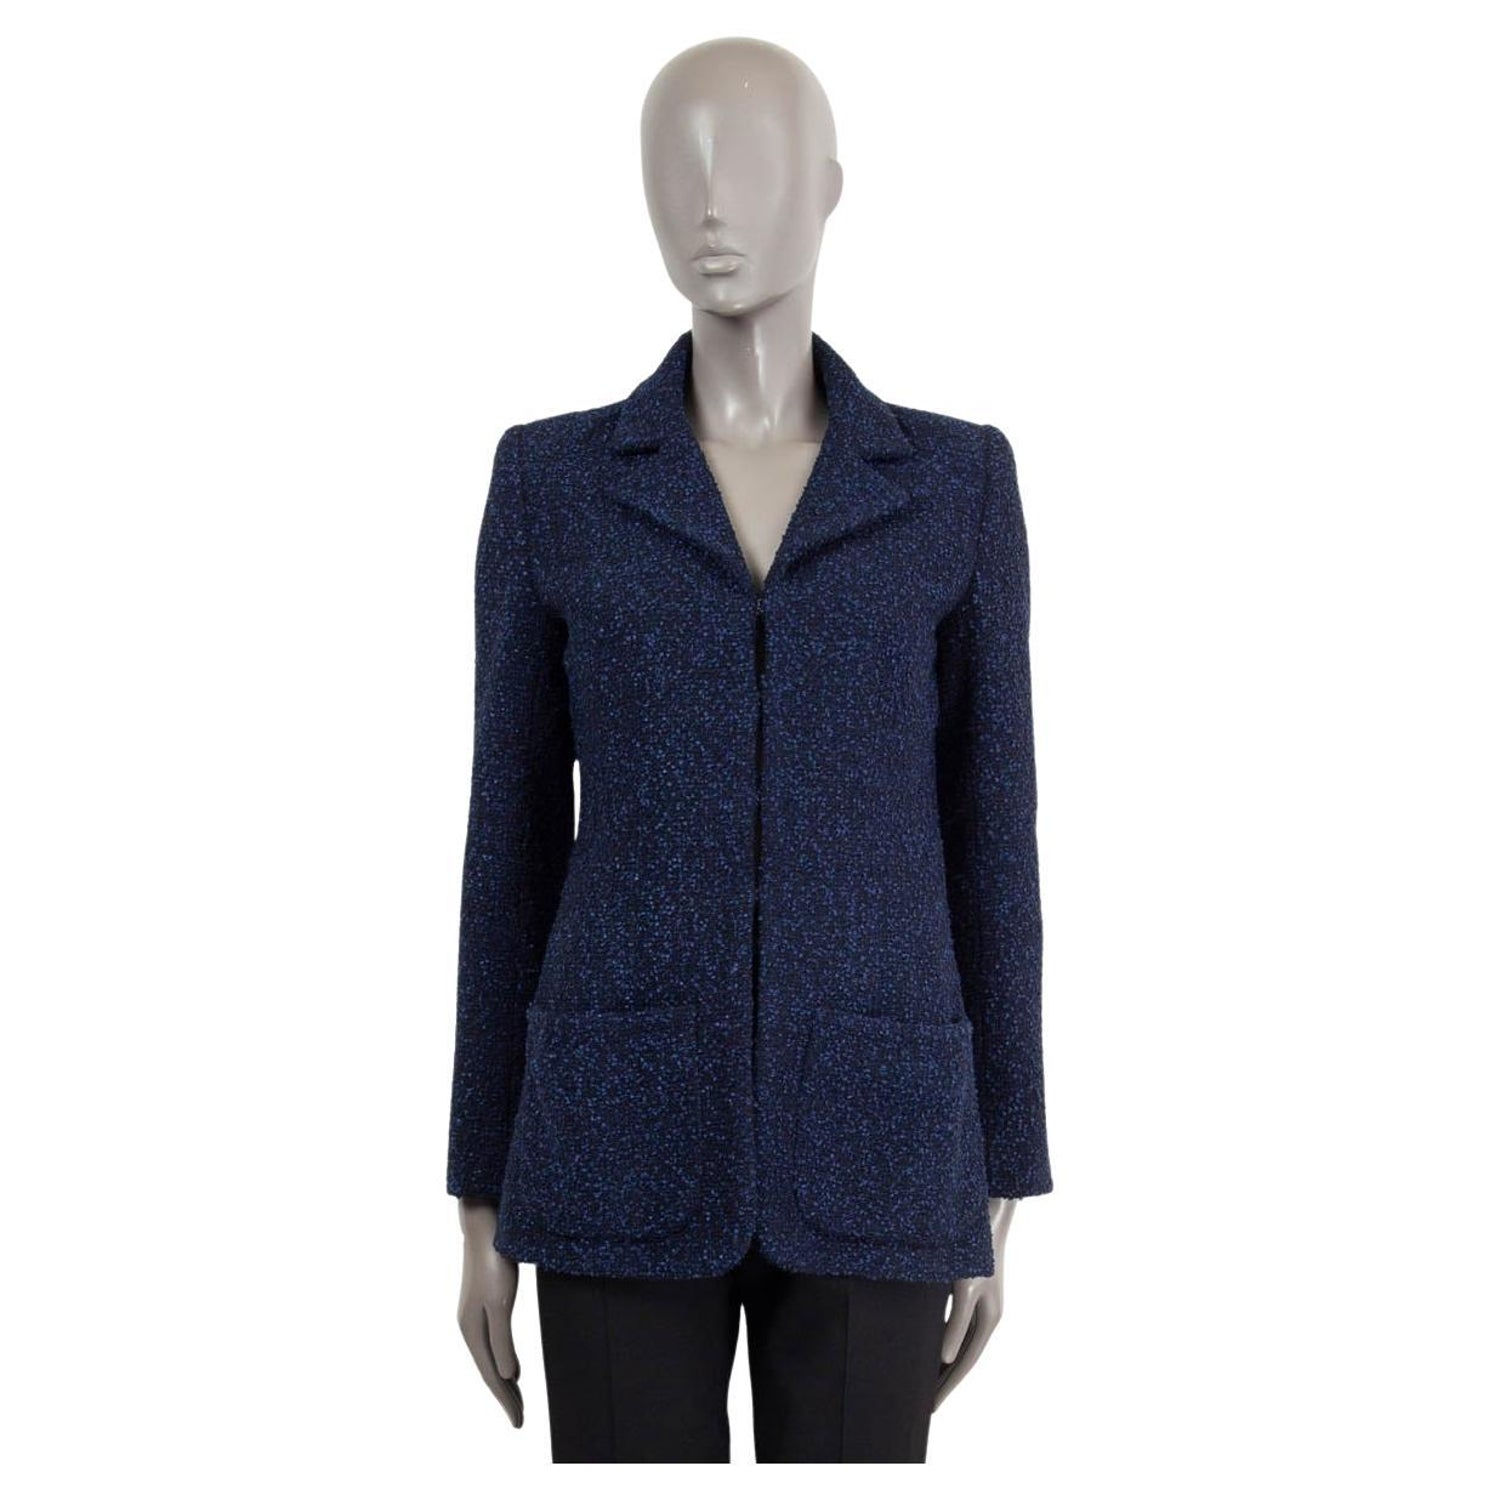 Chanel Tweed Military Collar Jacket Blue / White Cc Buttons Fr 40 / Us 8